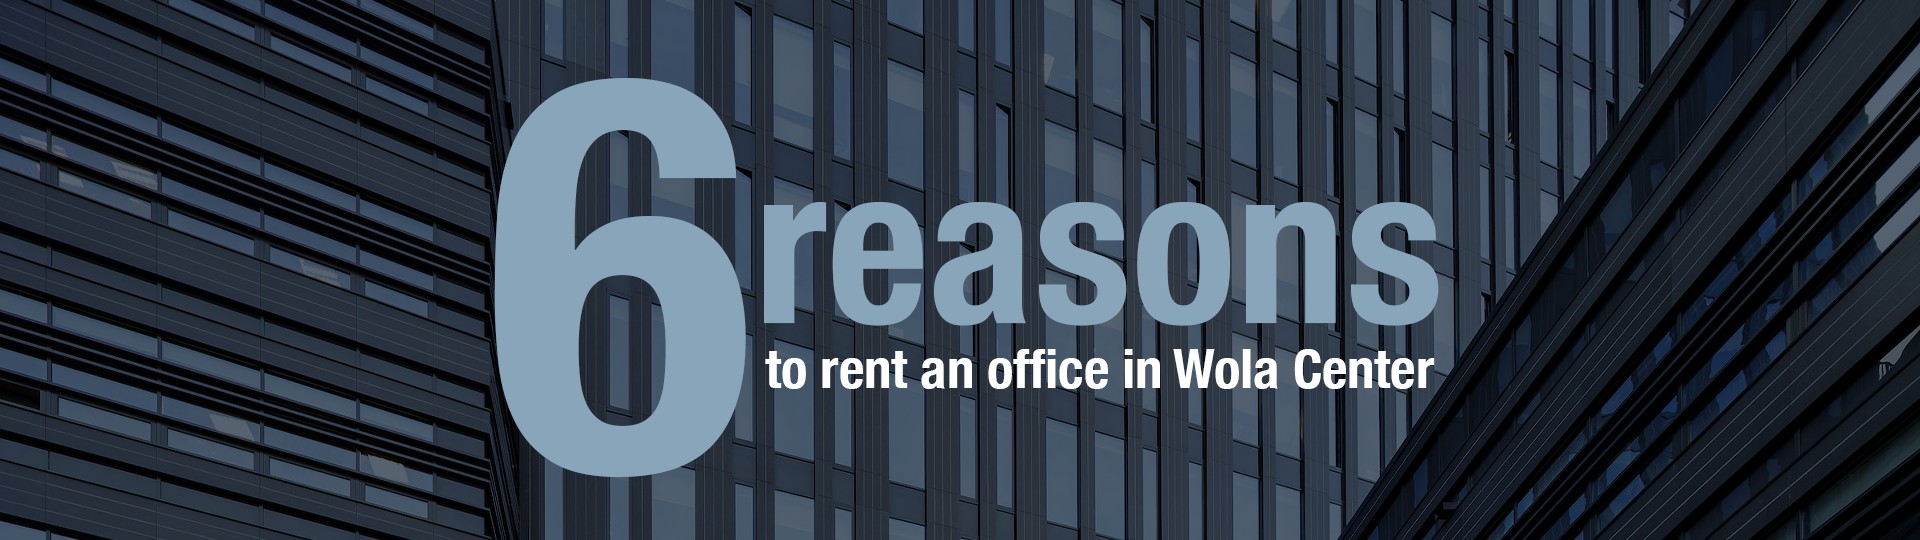 6 reasons to rent office in Wola Center